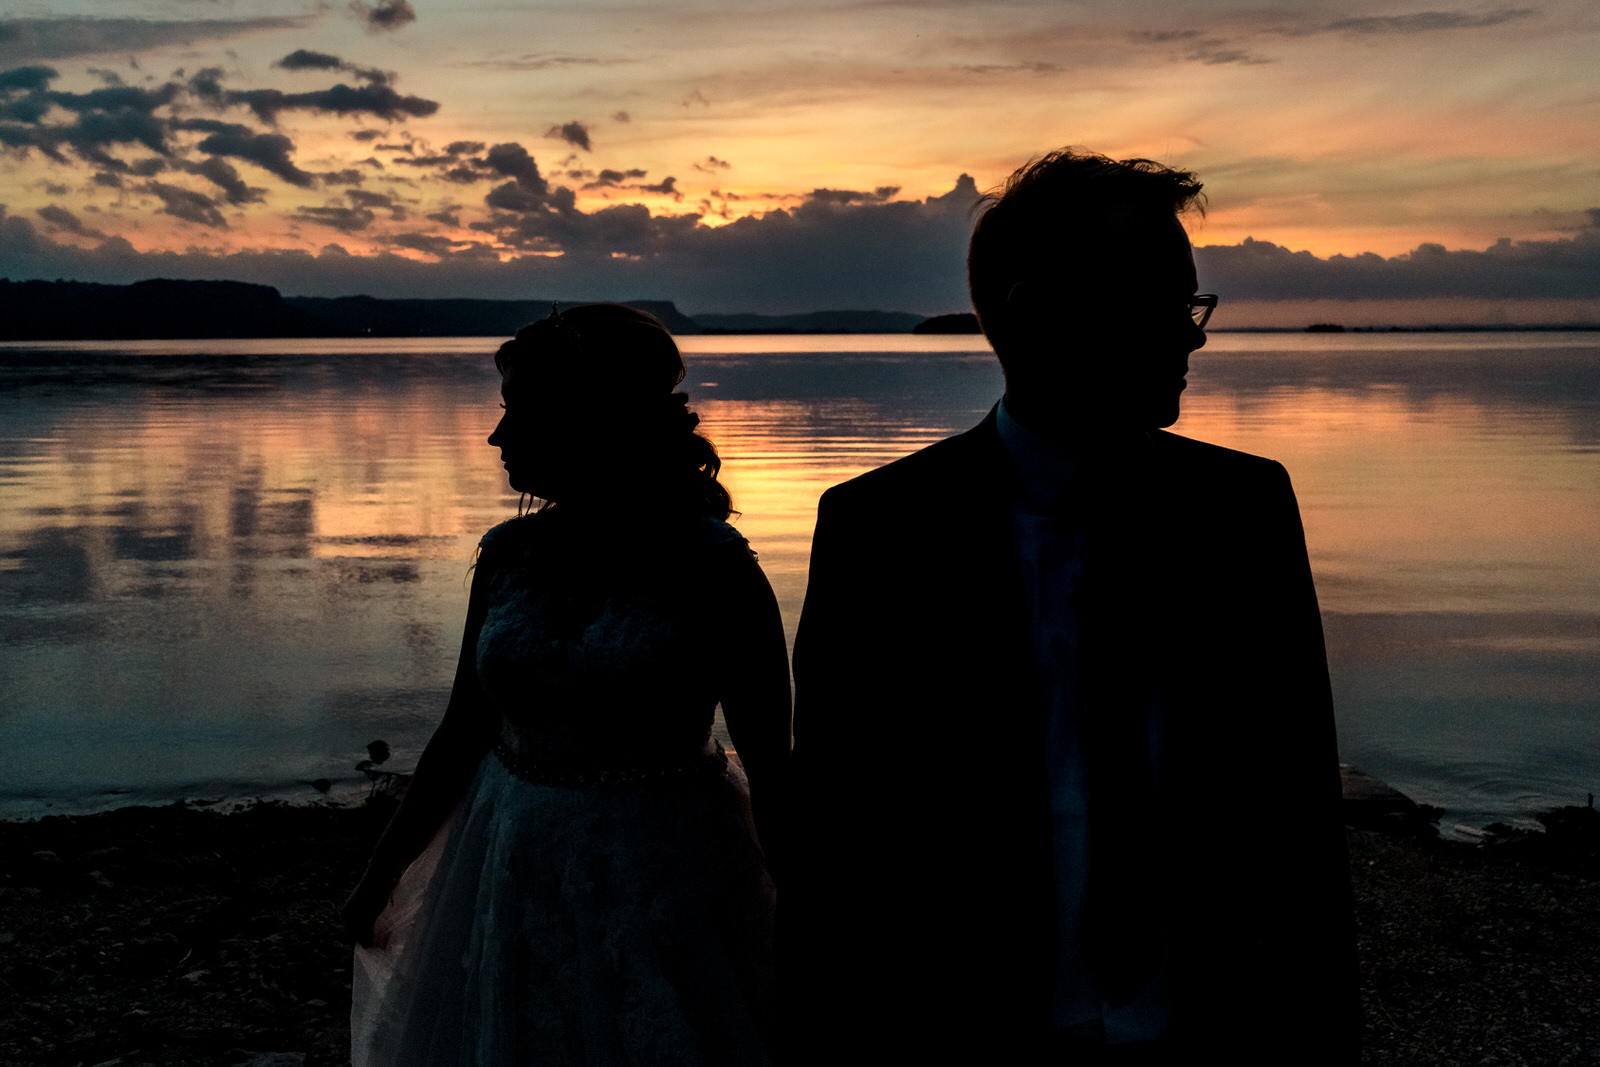 A silhouette of a bride and groom standing by a body of water at sunset.